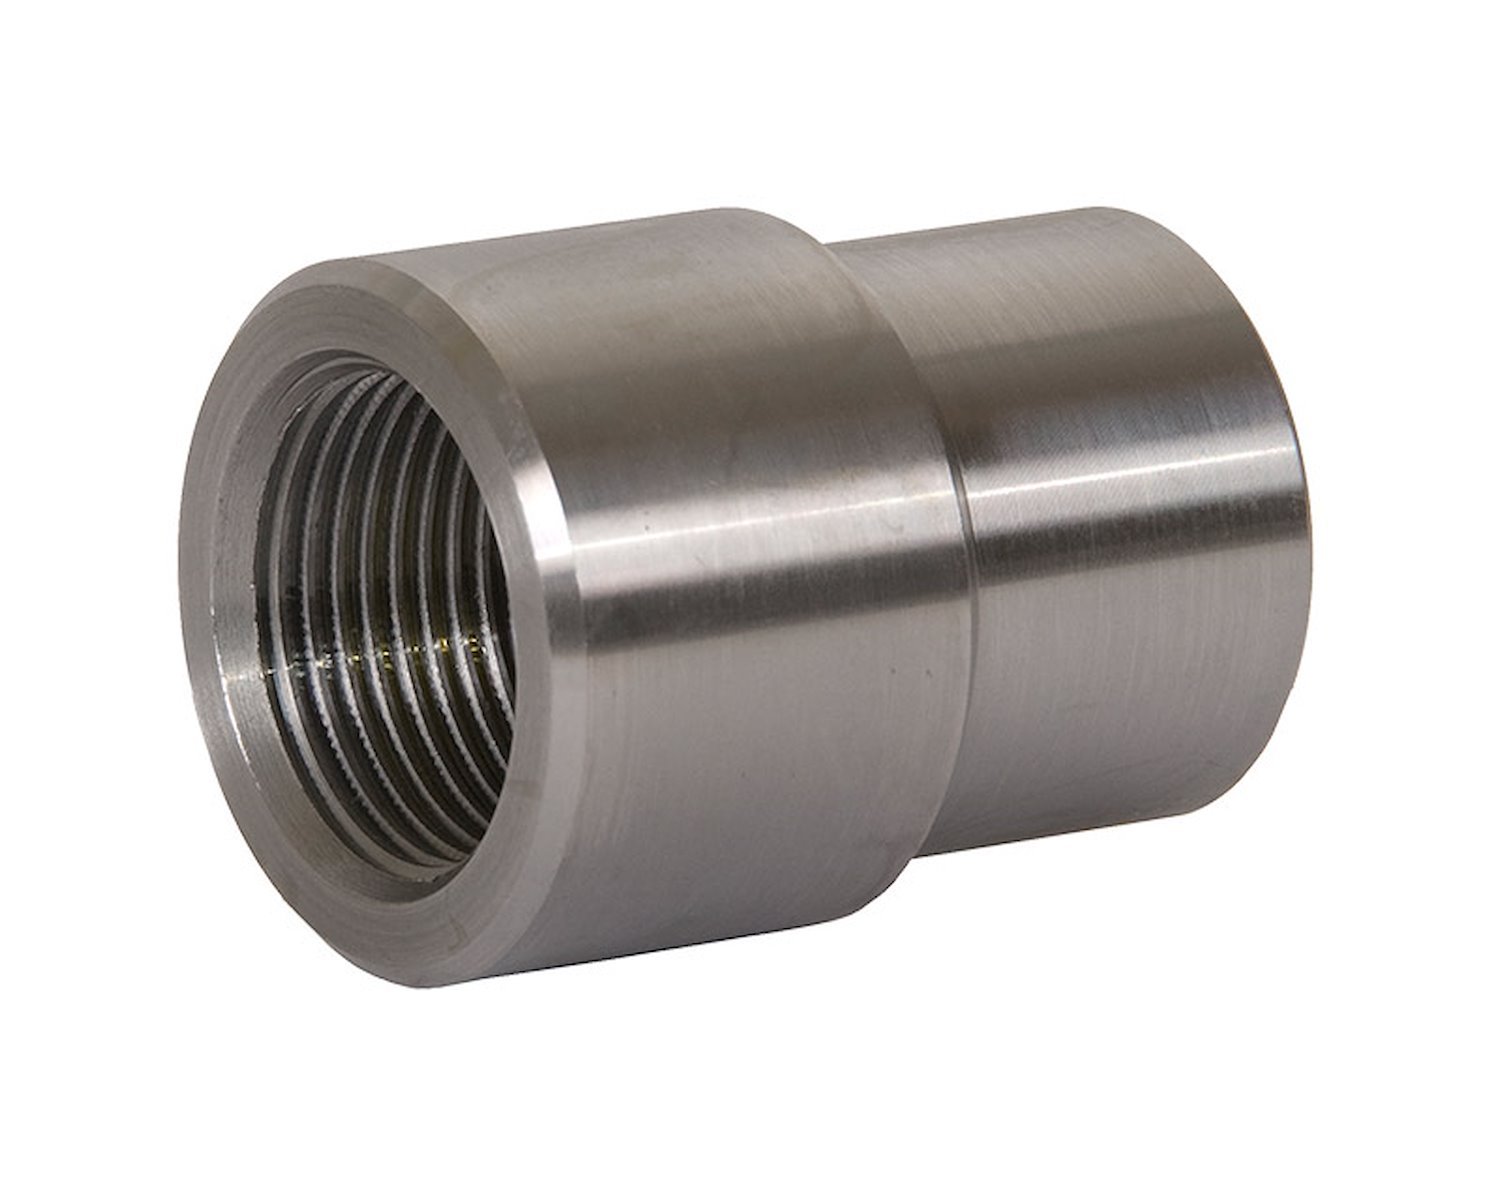 Threaded Tube Adapter Bung For use with 1.5" inside diameter tubing